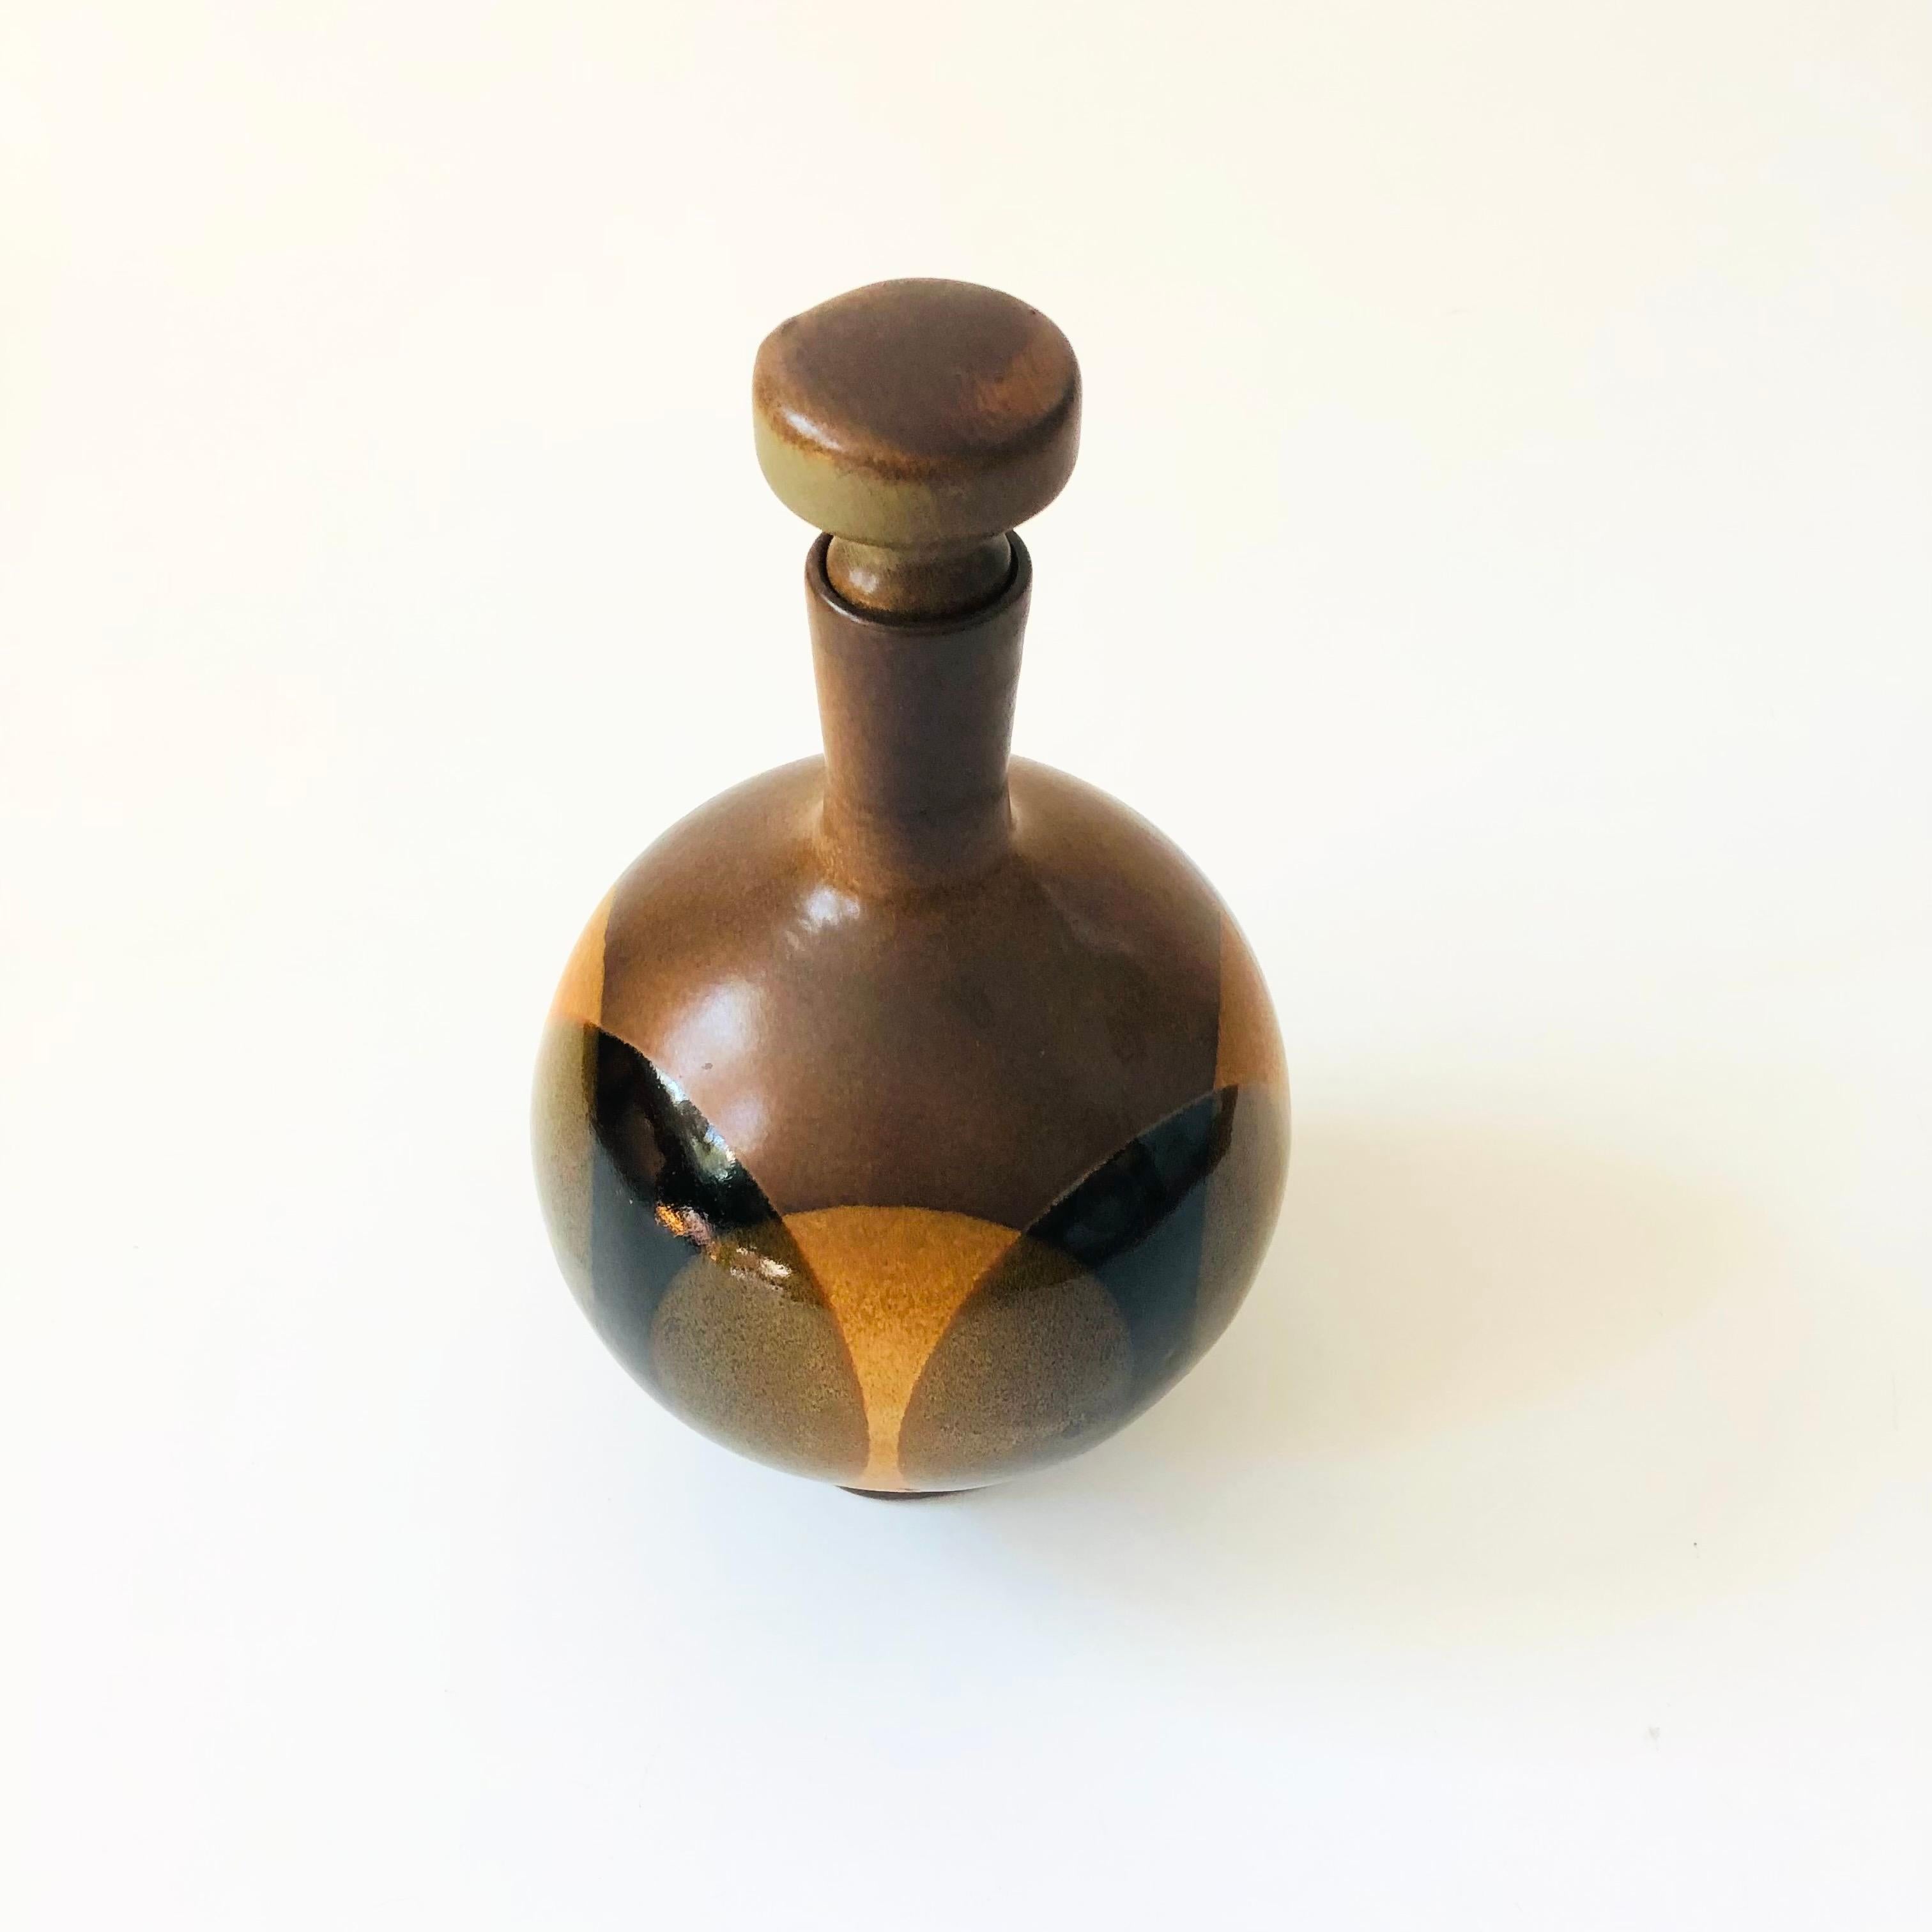 A mid century pottery decanter designed by Robert Maxwell for Pottery Craft.  Features overlapping glazes in brown and black. Marked on the base PC.

